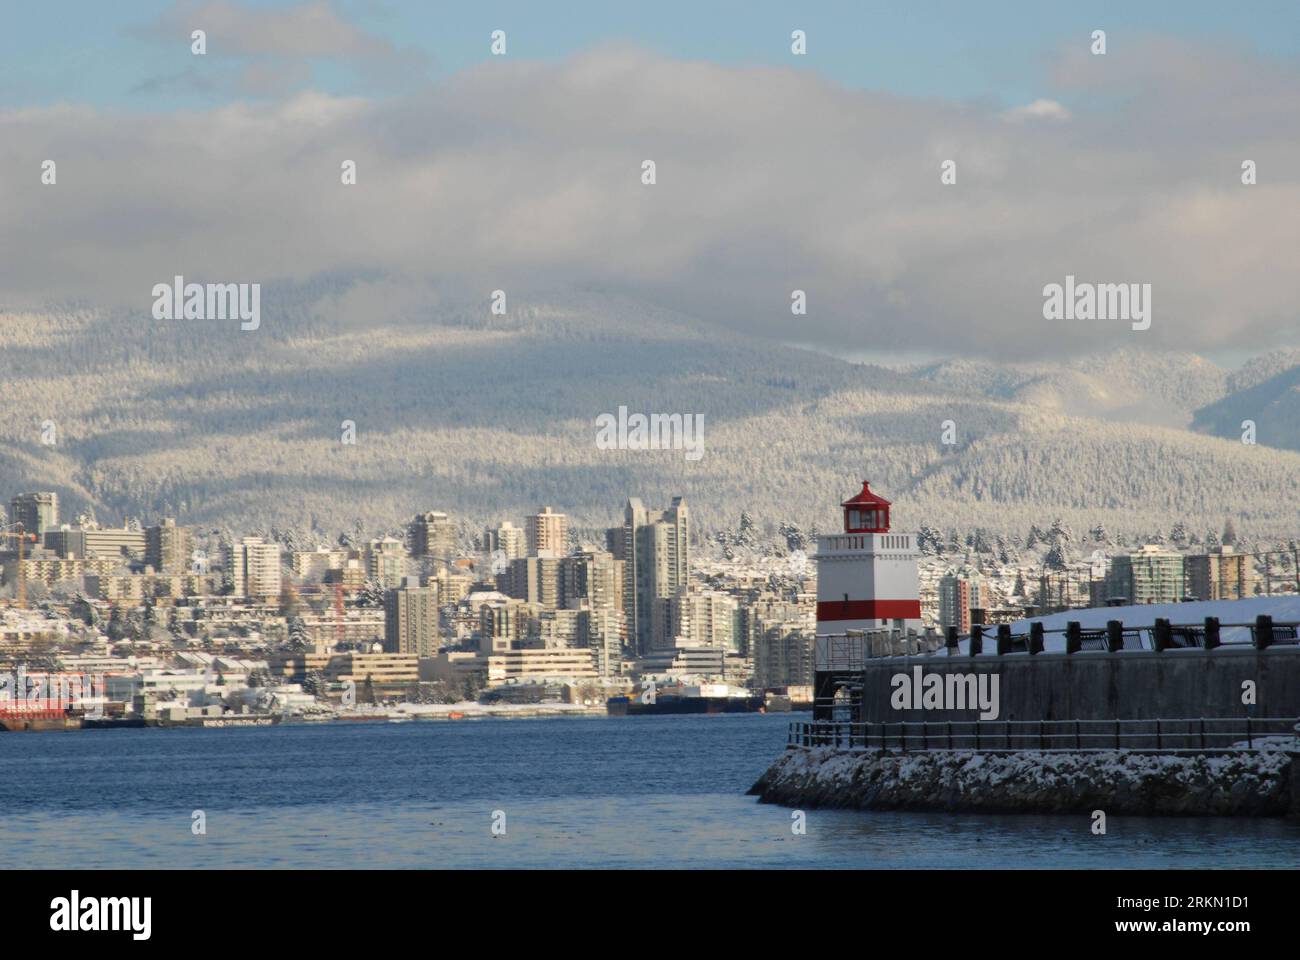 Bildnummer: 56905044  Datum: 17.01.2012  Copyright: imago/Xinhua (120118) -- VANCOUVER, Jan. 18, 2011 (Xinhua) -- View of the snow on the North Shore mountains along the seawall at Brockton Point in Stanley Park in Vancouver, Jan. 17, 2012. Environment Canada has issued a snowfall warning for Metro Vancouver, with estimated 20cm of fresh snow to fall on Vancouver overnight. Wind chill caused by a blast of continental arctic air could cause the temperature to drop to -20 degree centigrade in land of Howe Sound in the next few days. (Xinhua/Sergei Bachlakov) (zyw) CANADA-VANCOUVER-WEATHER PUBLIC Stock Photo